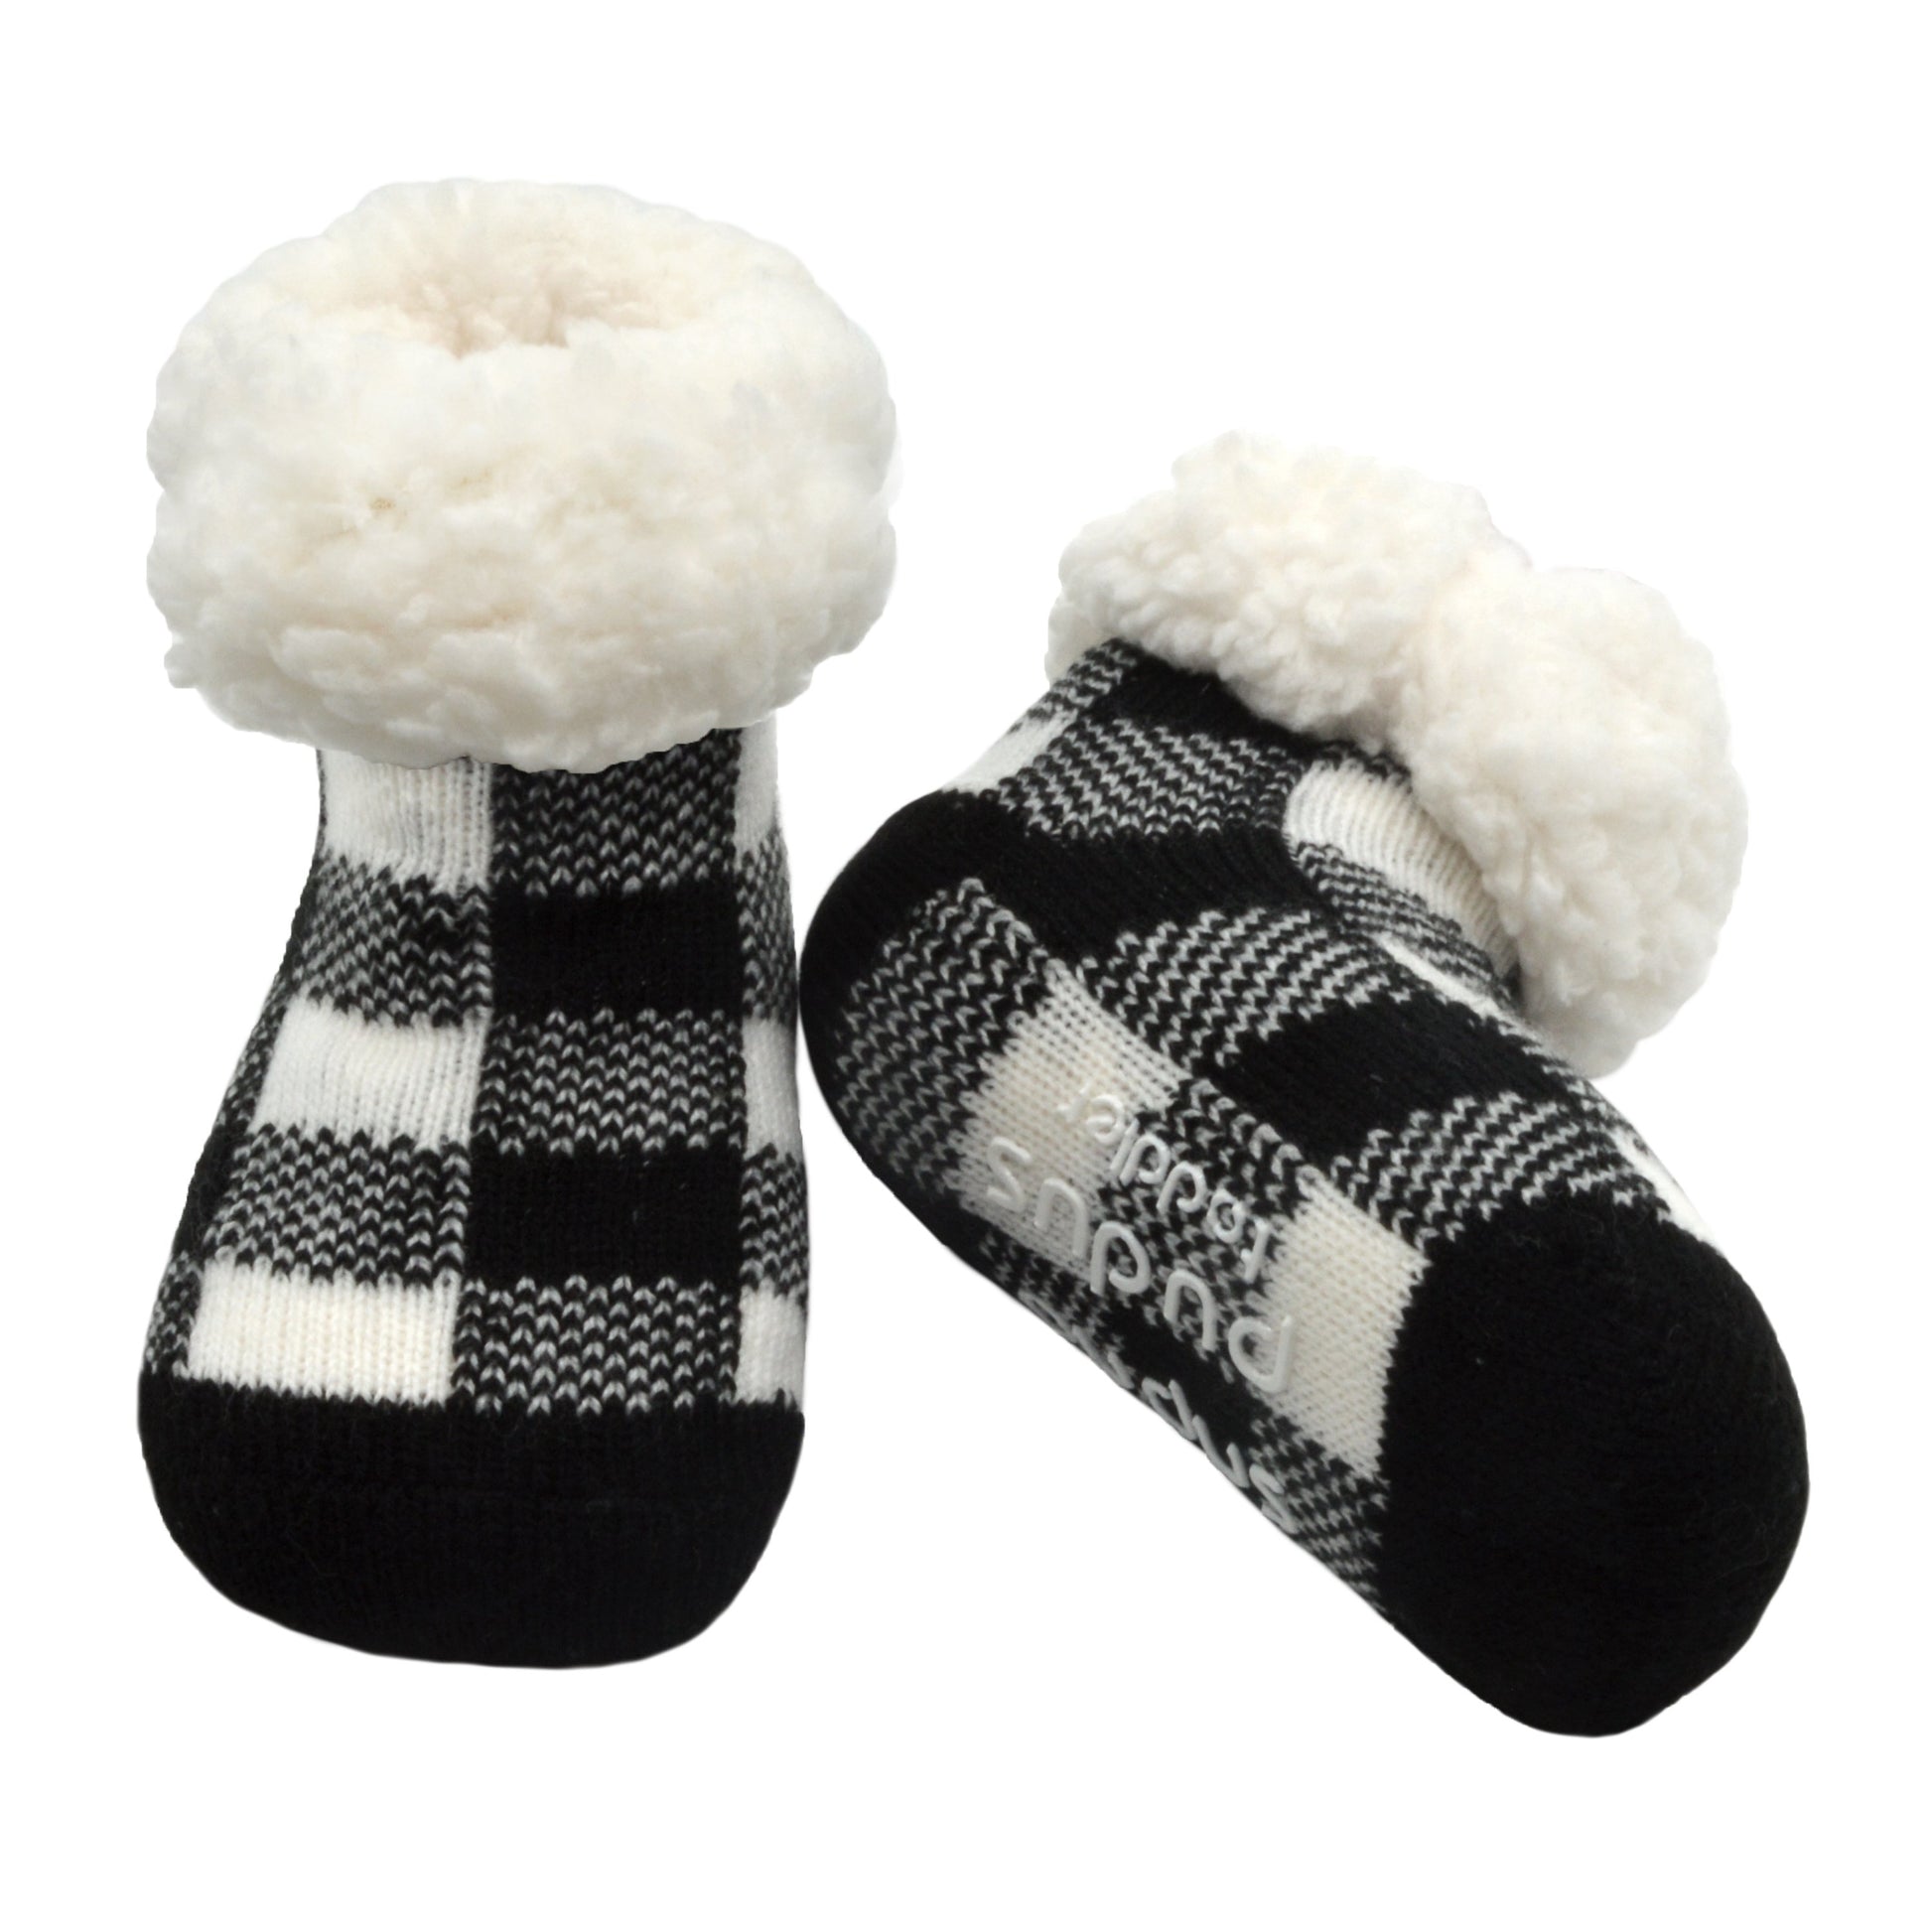 Pudus Cozy Winter Slipper Socks for Toddlers with Non-Slip Grippers and Faux Fur Sherpa Fleece - Baby Boy and Girl Fuzzy Socks (Ages 1-3) Lumberjack White - Toddler Slipper Sock